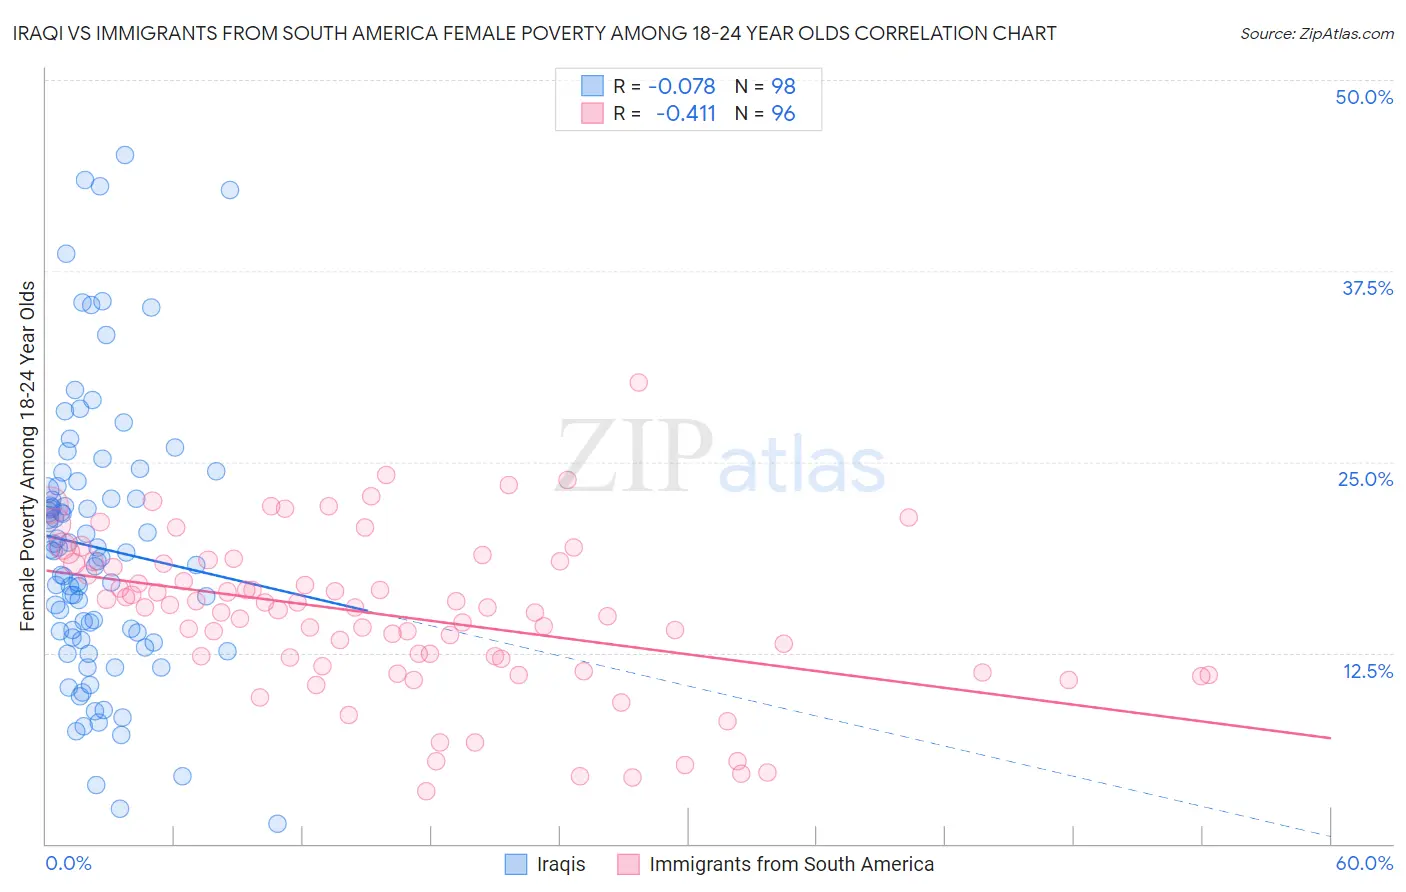 Iraqi vs Immigrants from South America Female Poverty Among 18-24 Year Olds